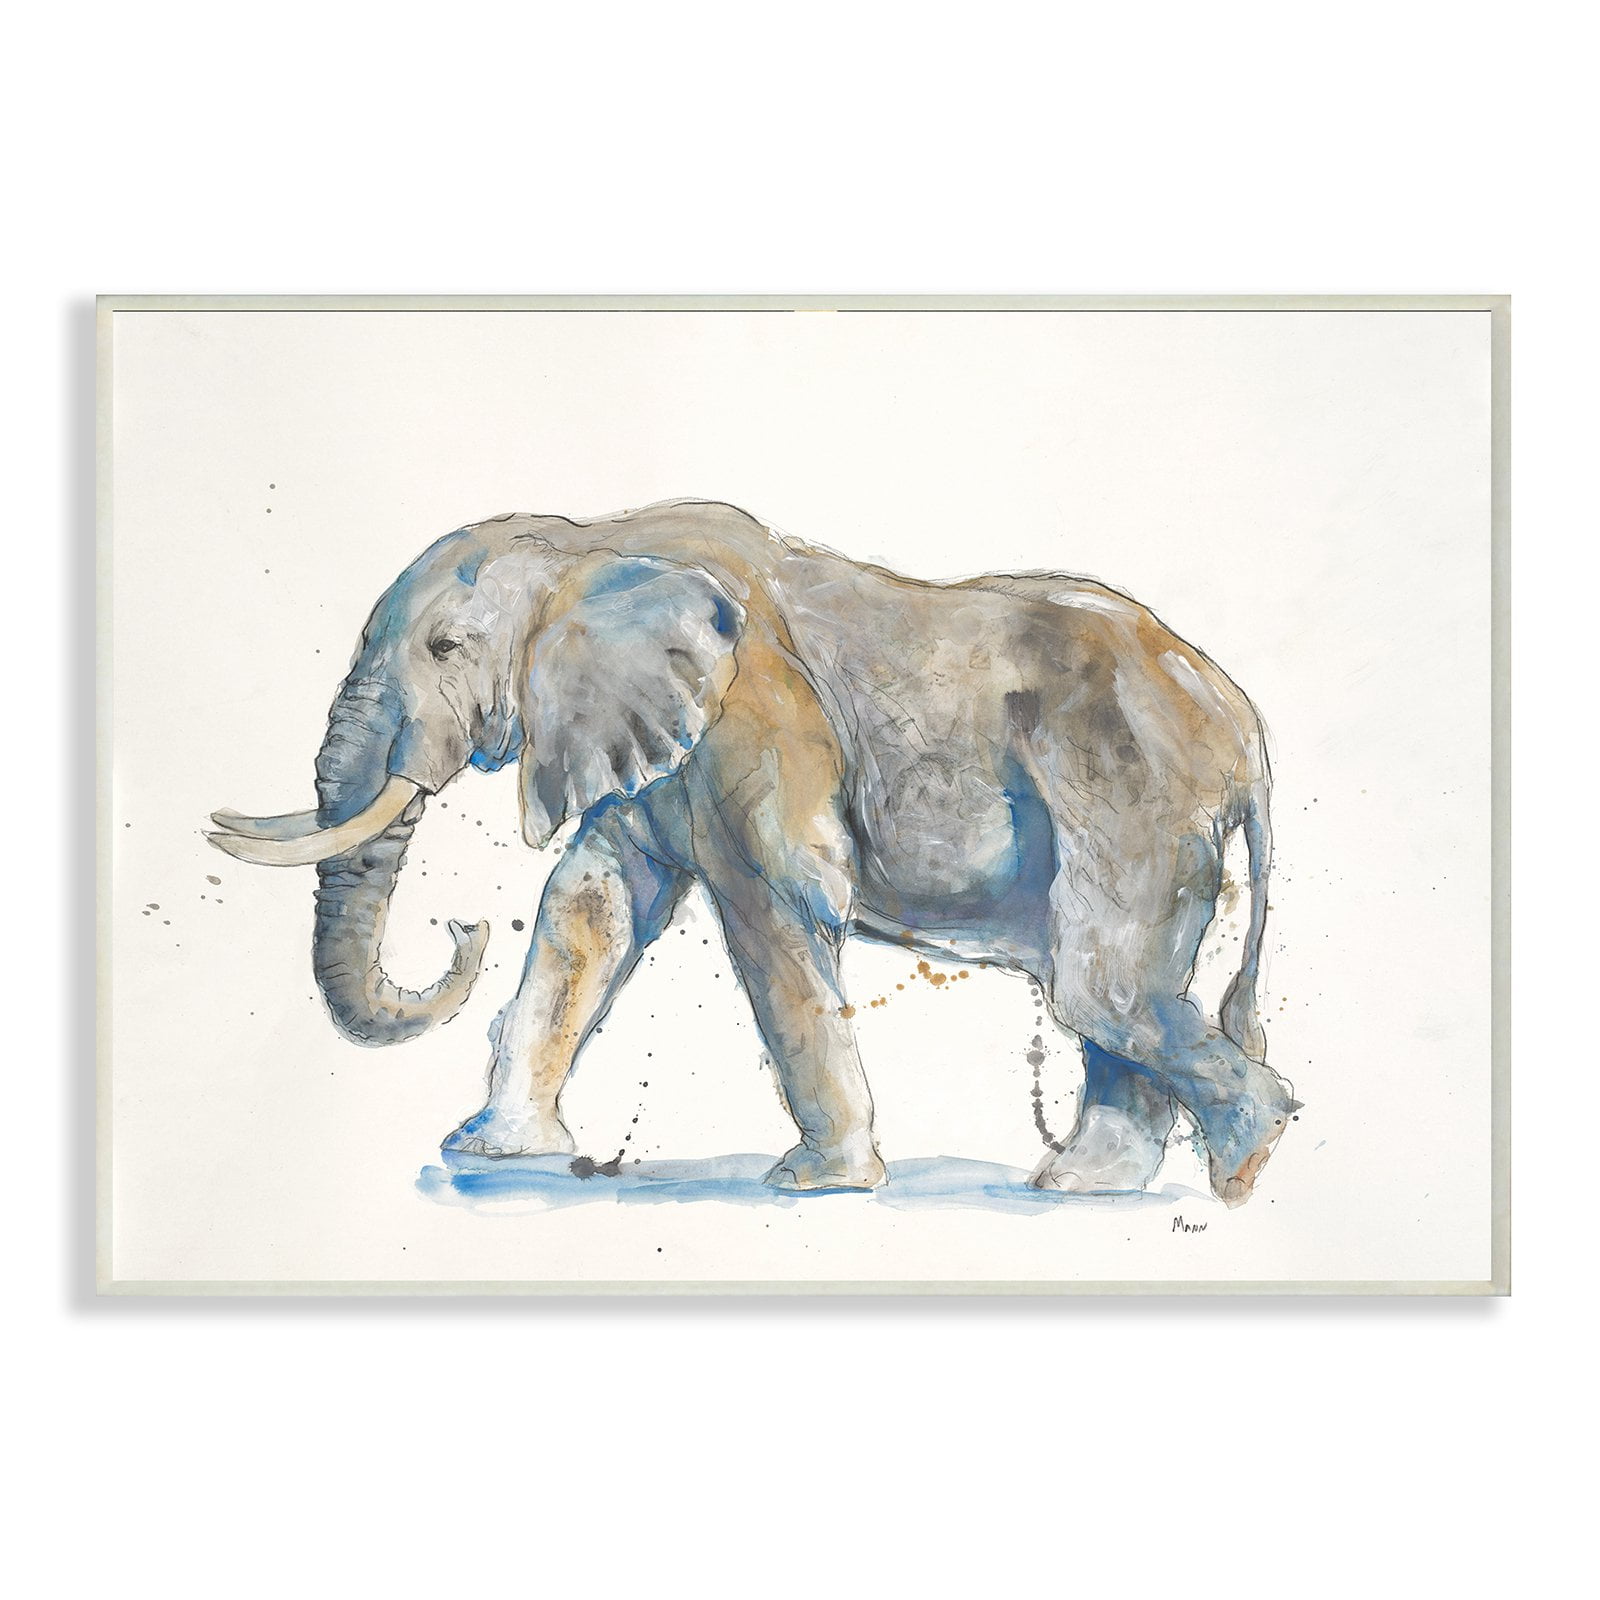 The Stupell Home Decor Collection Elephant On A Bicycle Super 